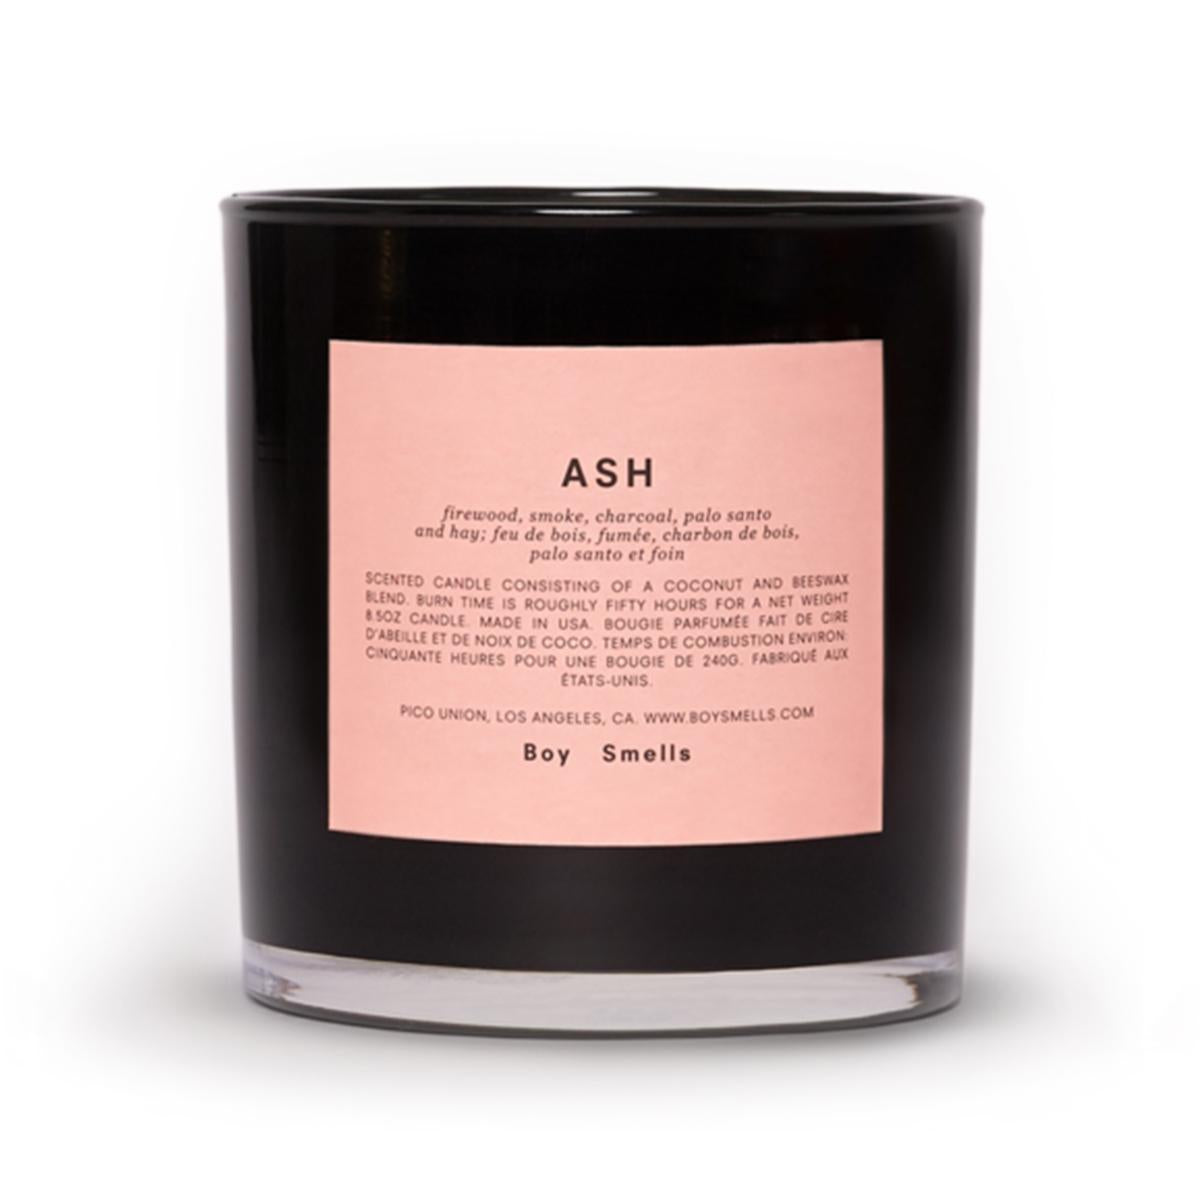 Primary image of Ash Candle